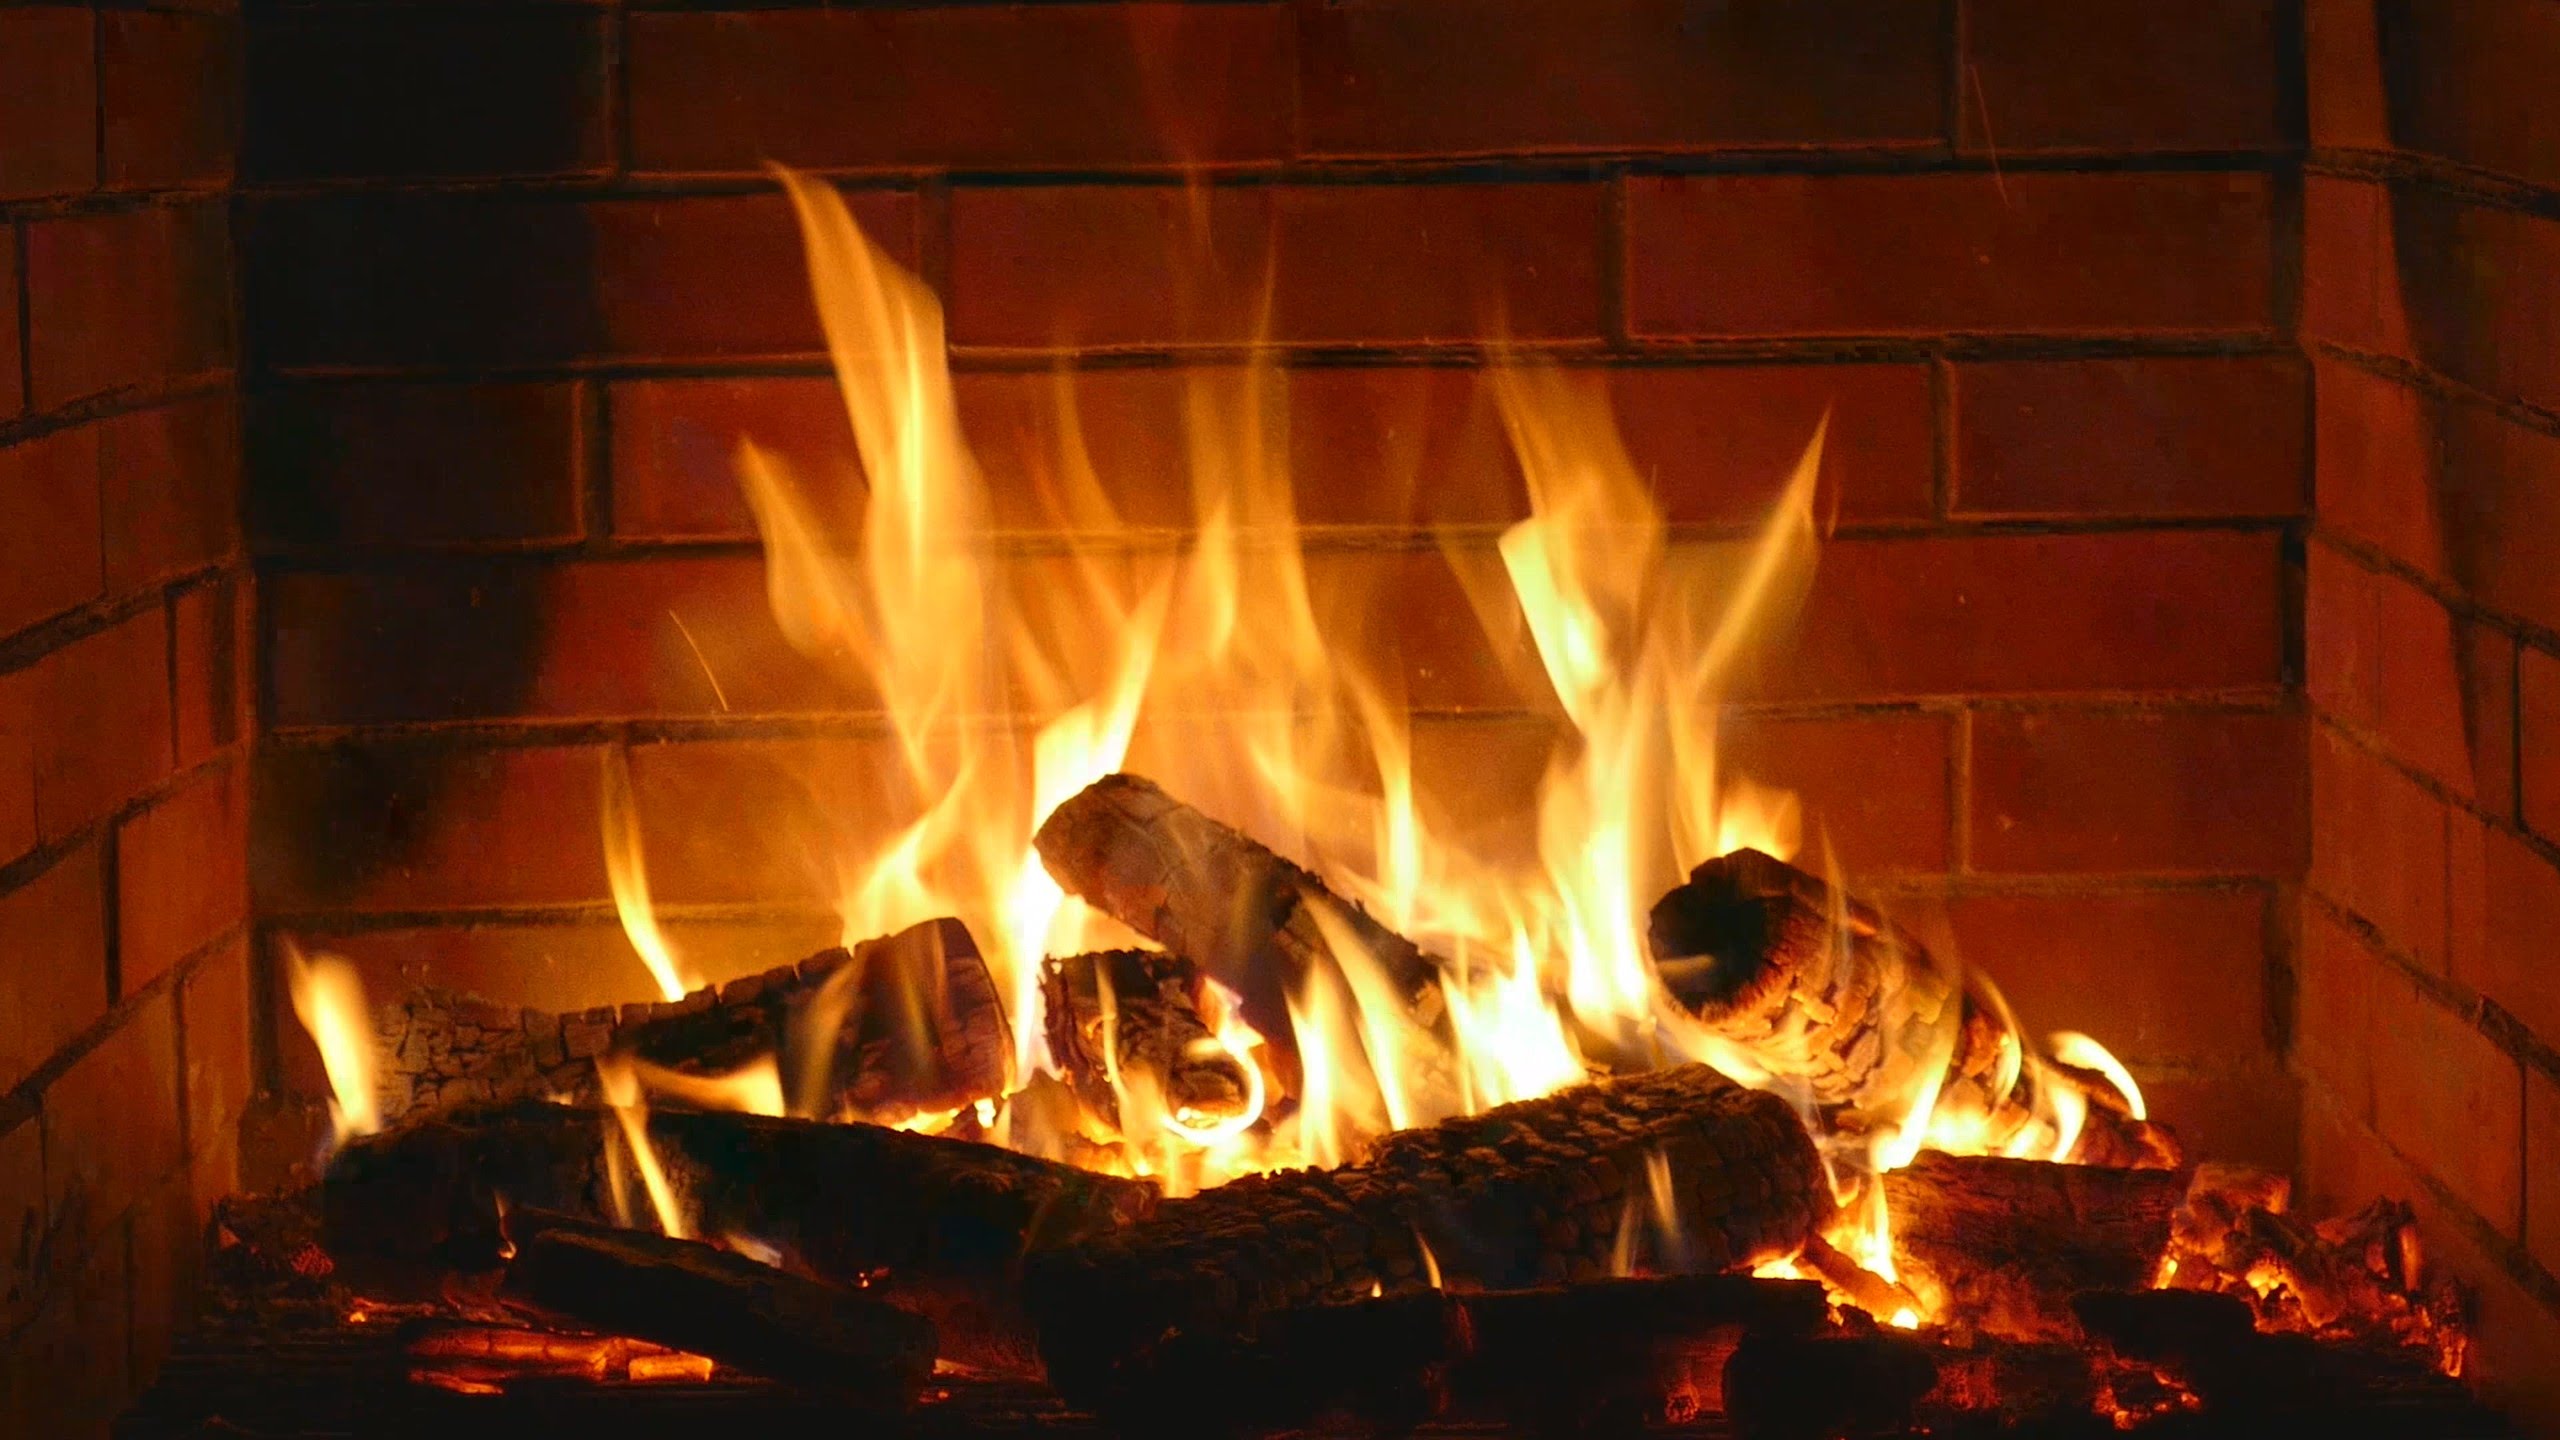 Fireplace - romantic - Full HD and 4K - 2 hours crackling logs ...